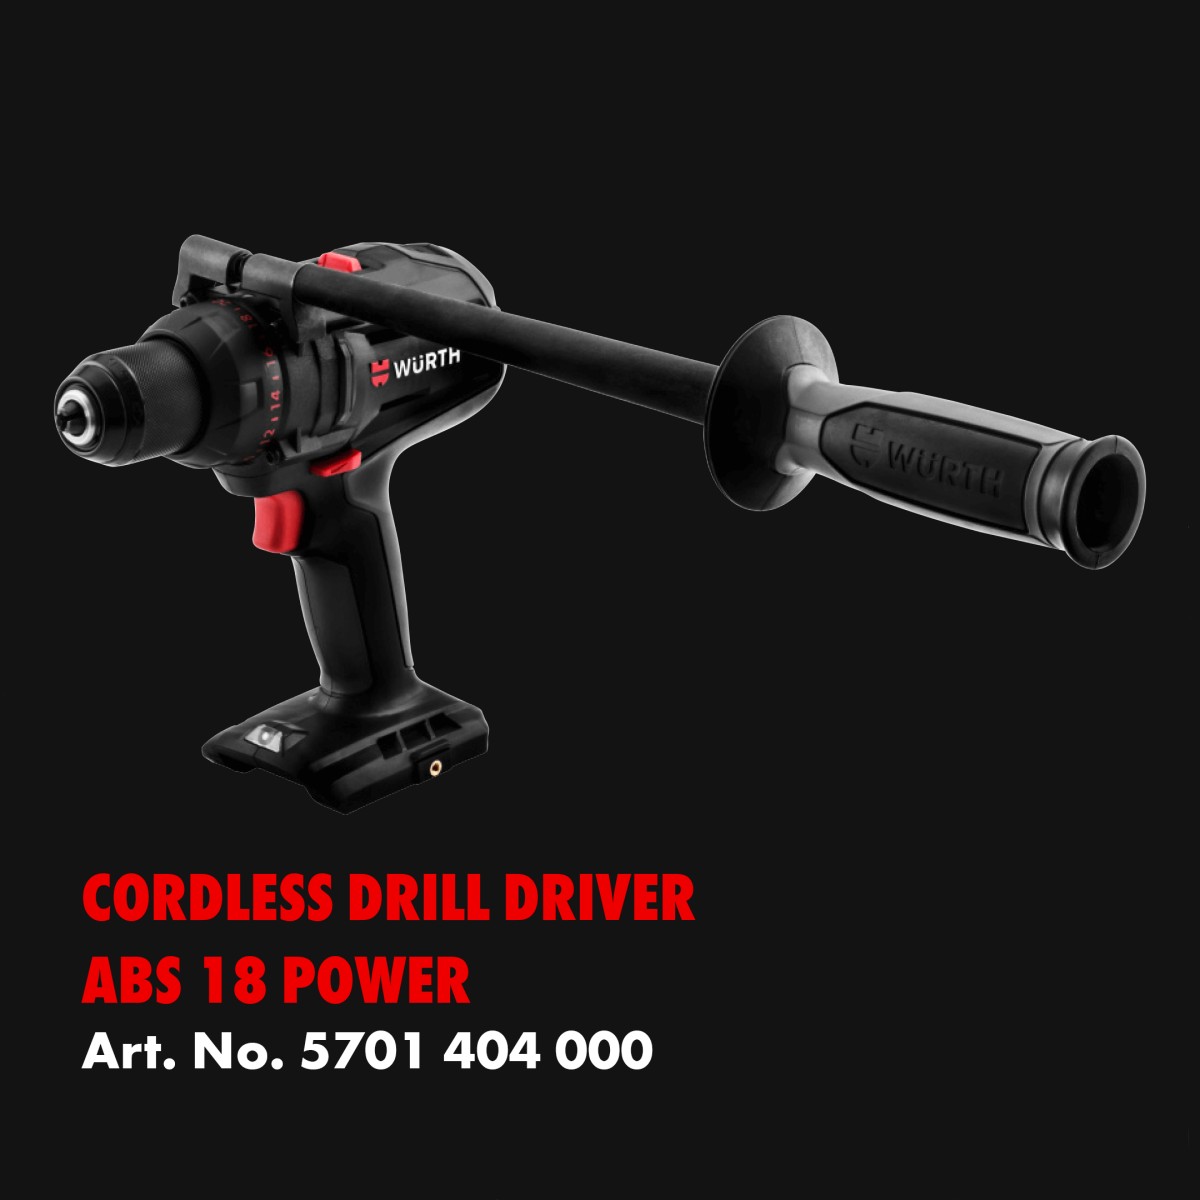 Cordless Drill Driver ABS-18 Power